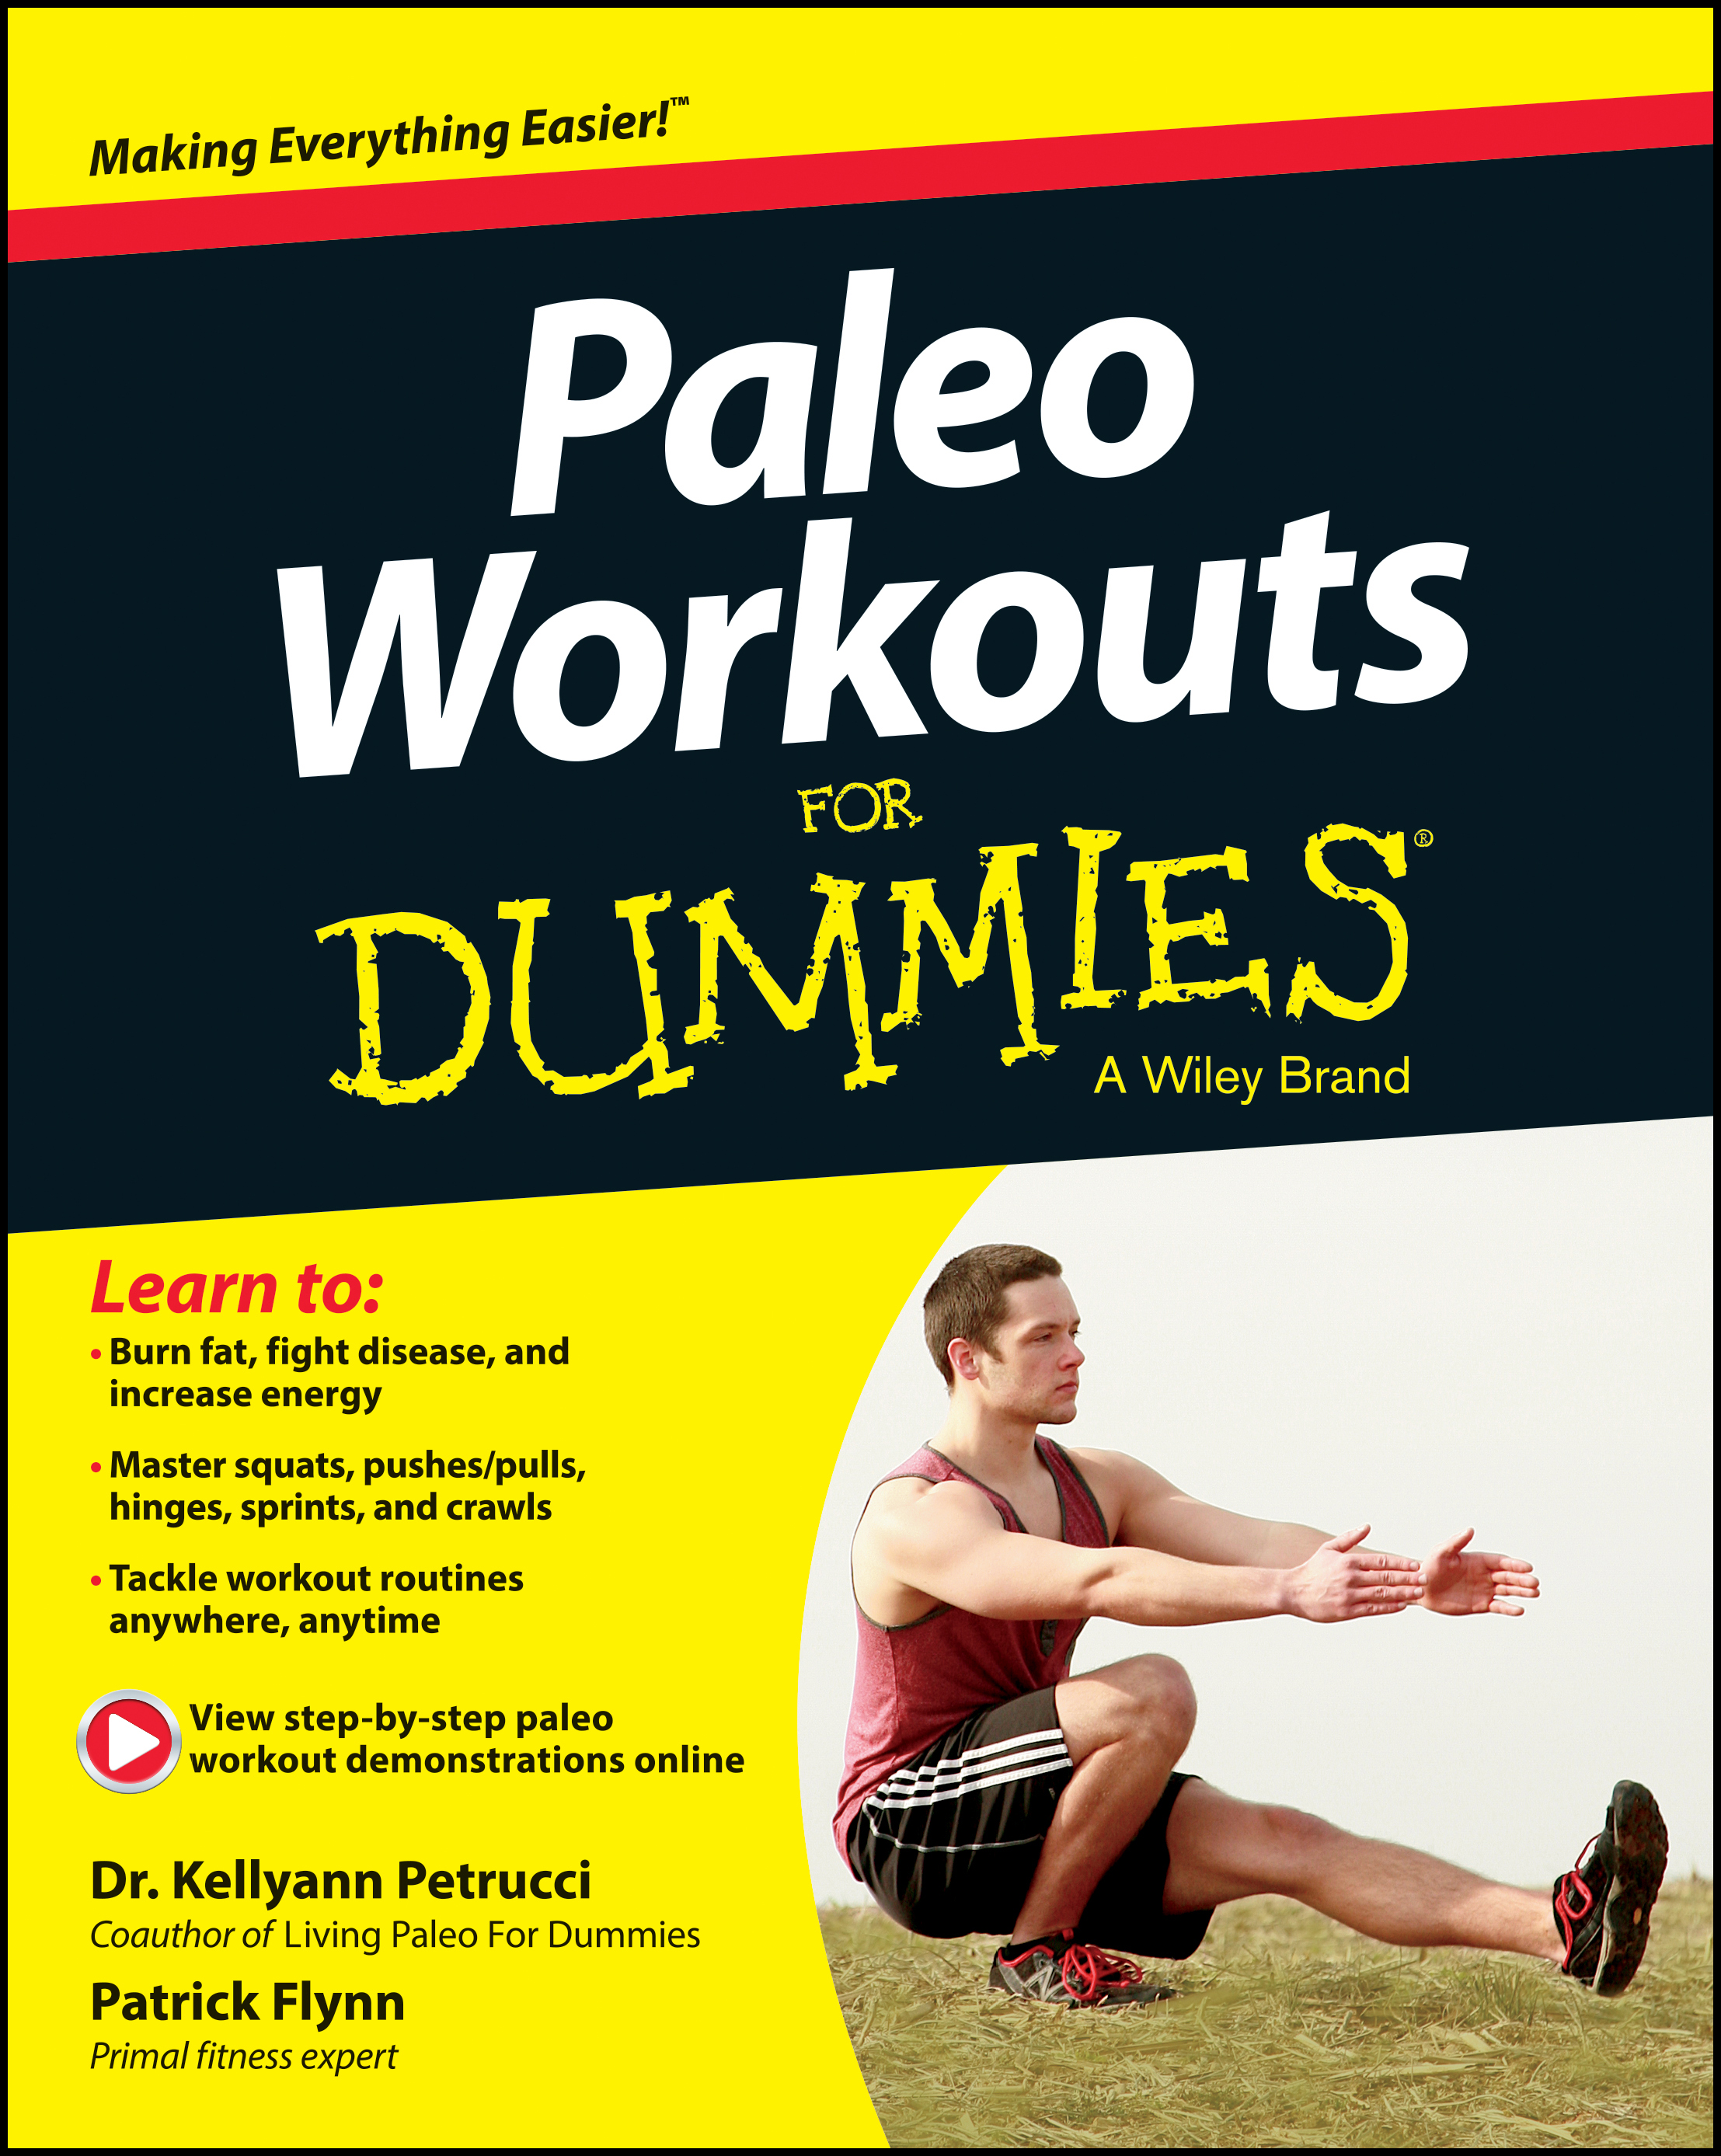 Best Paleo workouts for dummies pdf for Push Pull Legs